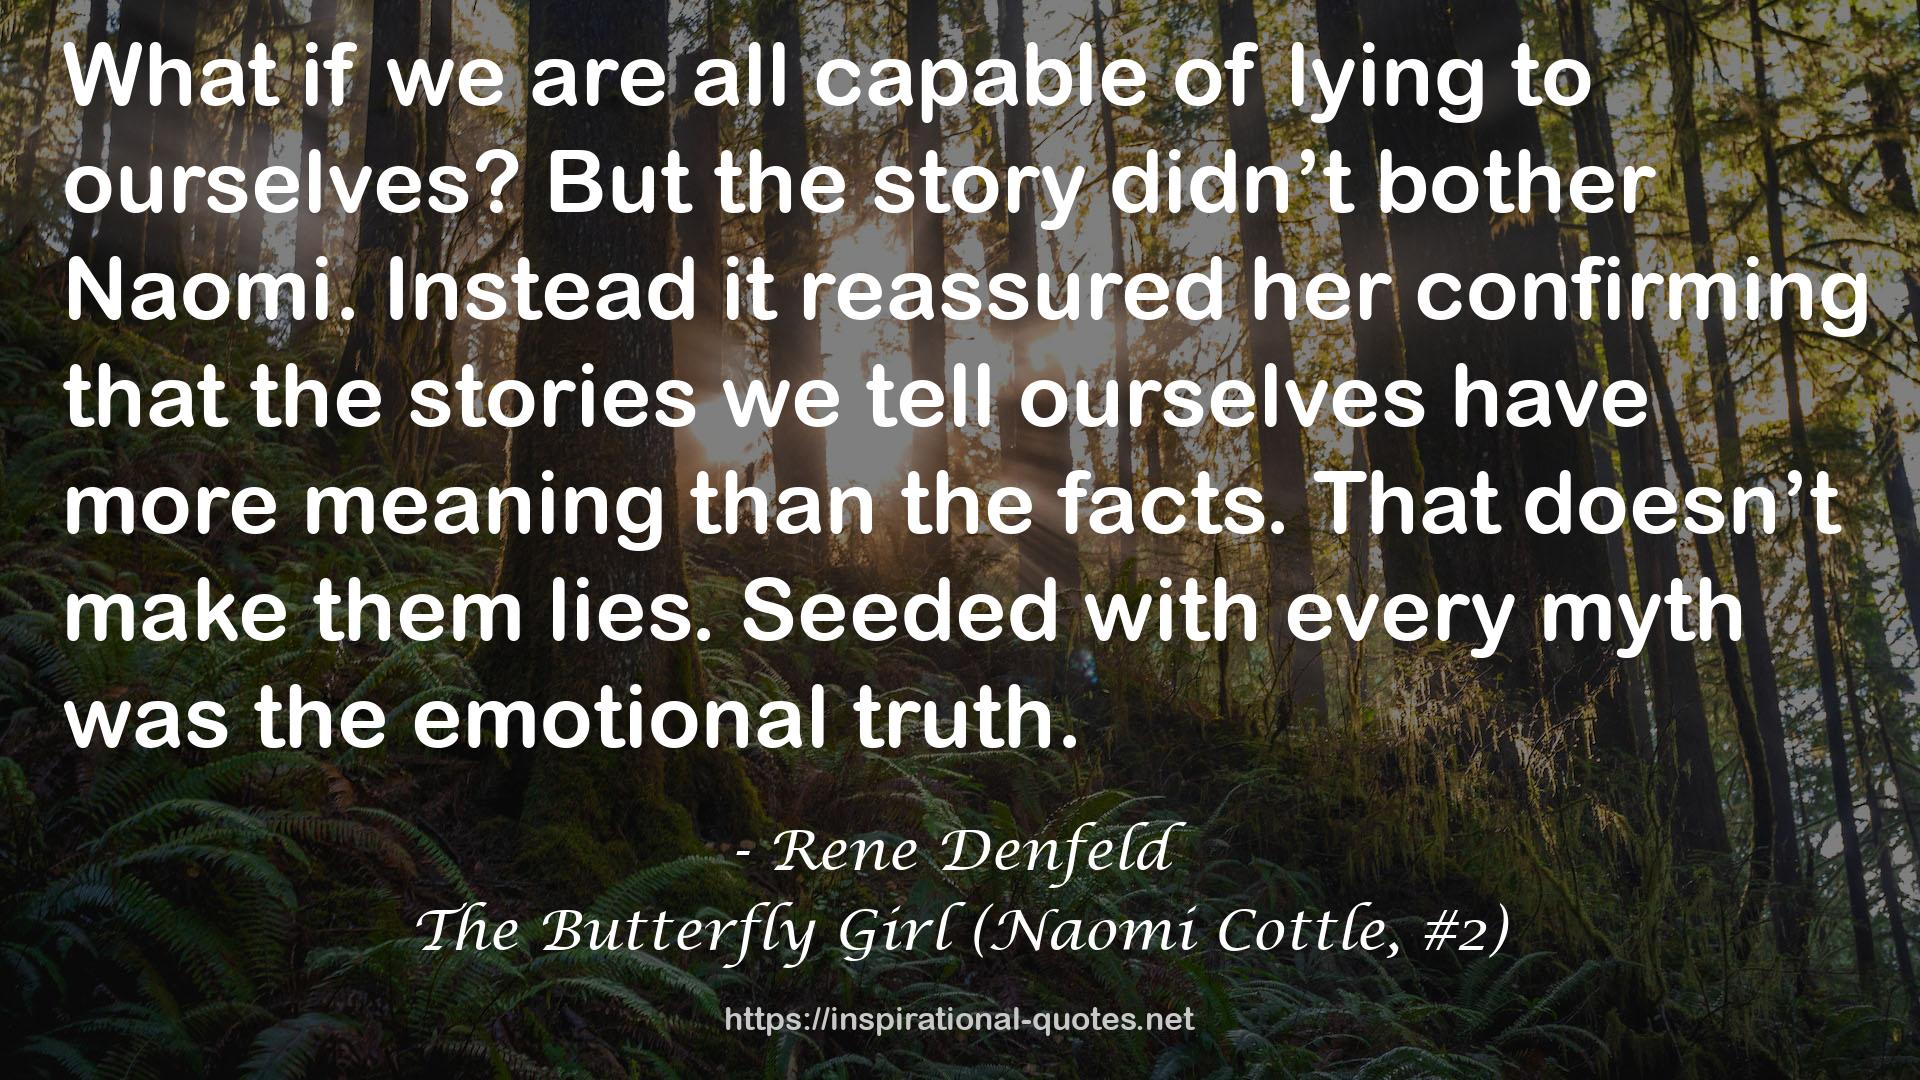 The Butterfly Girl (Naomi Cottle, #2) QUOTES